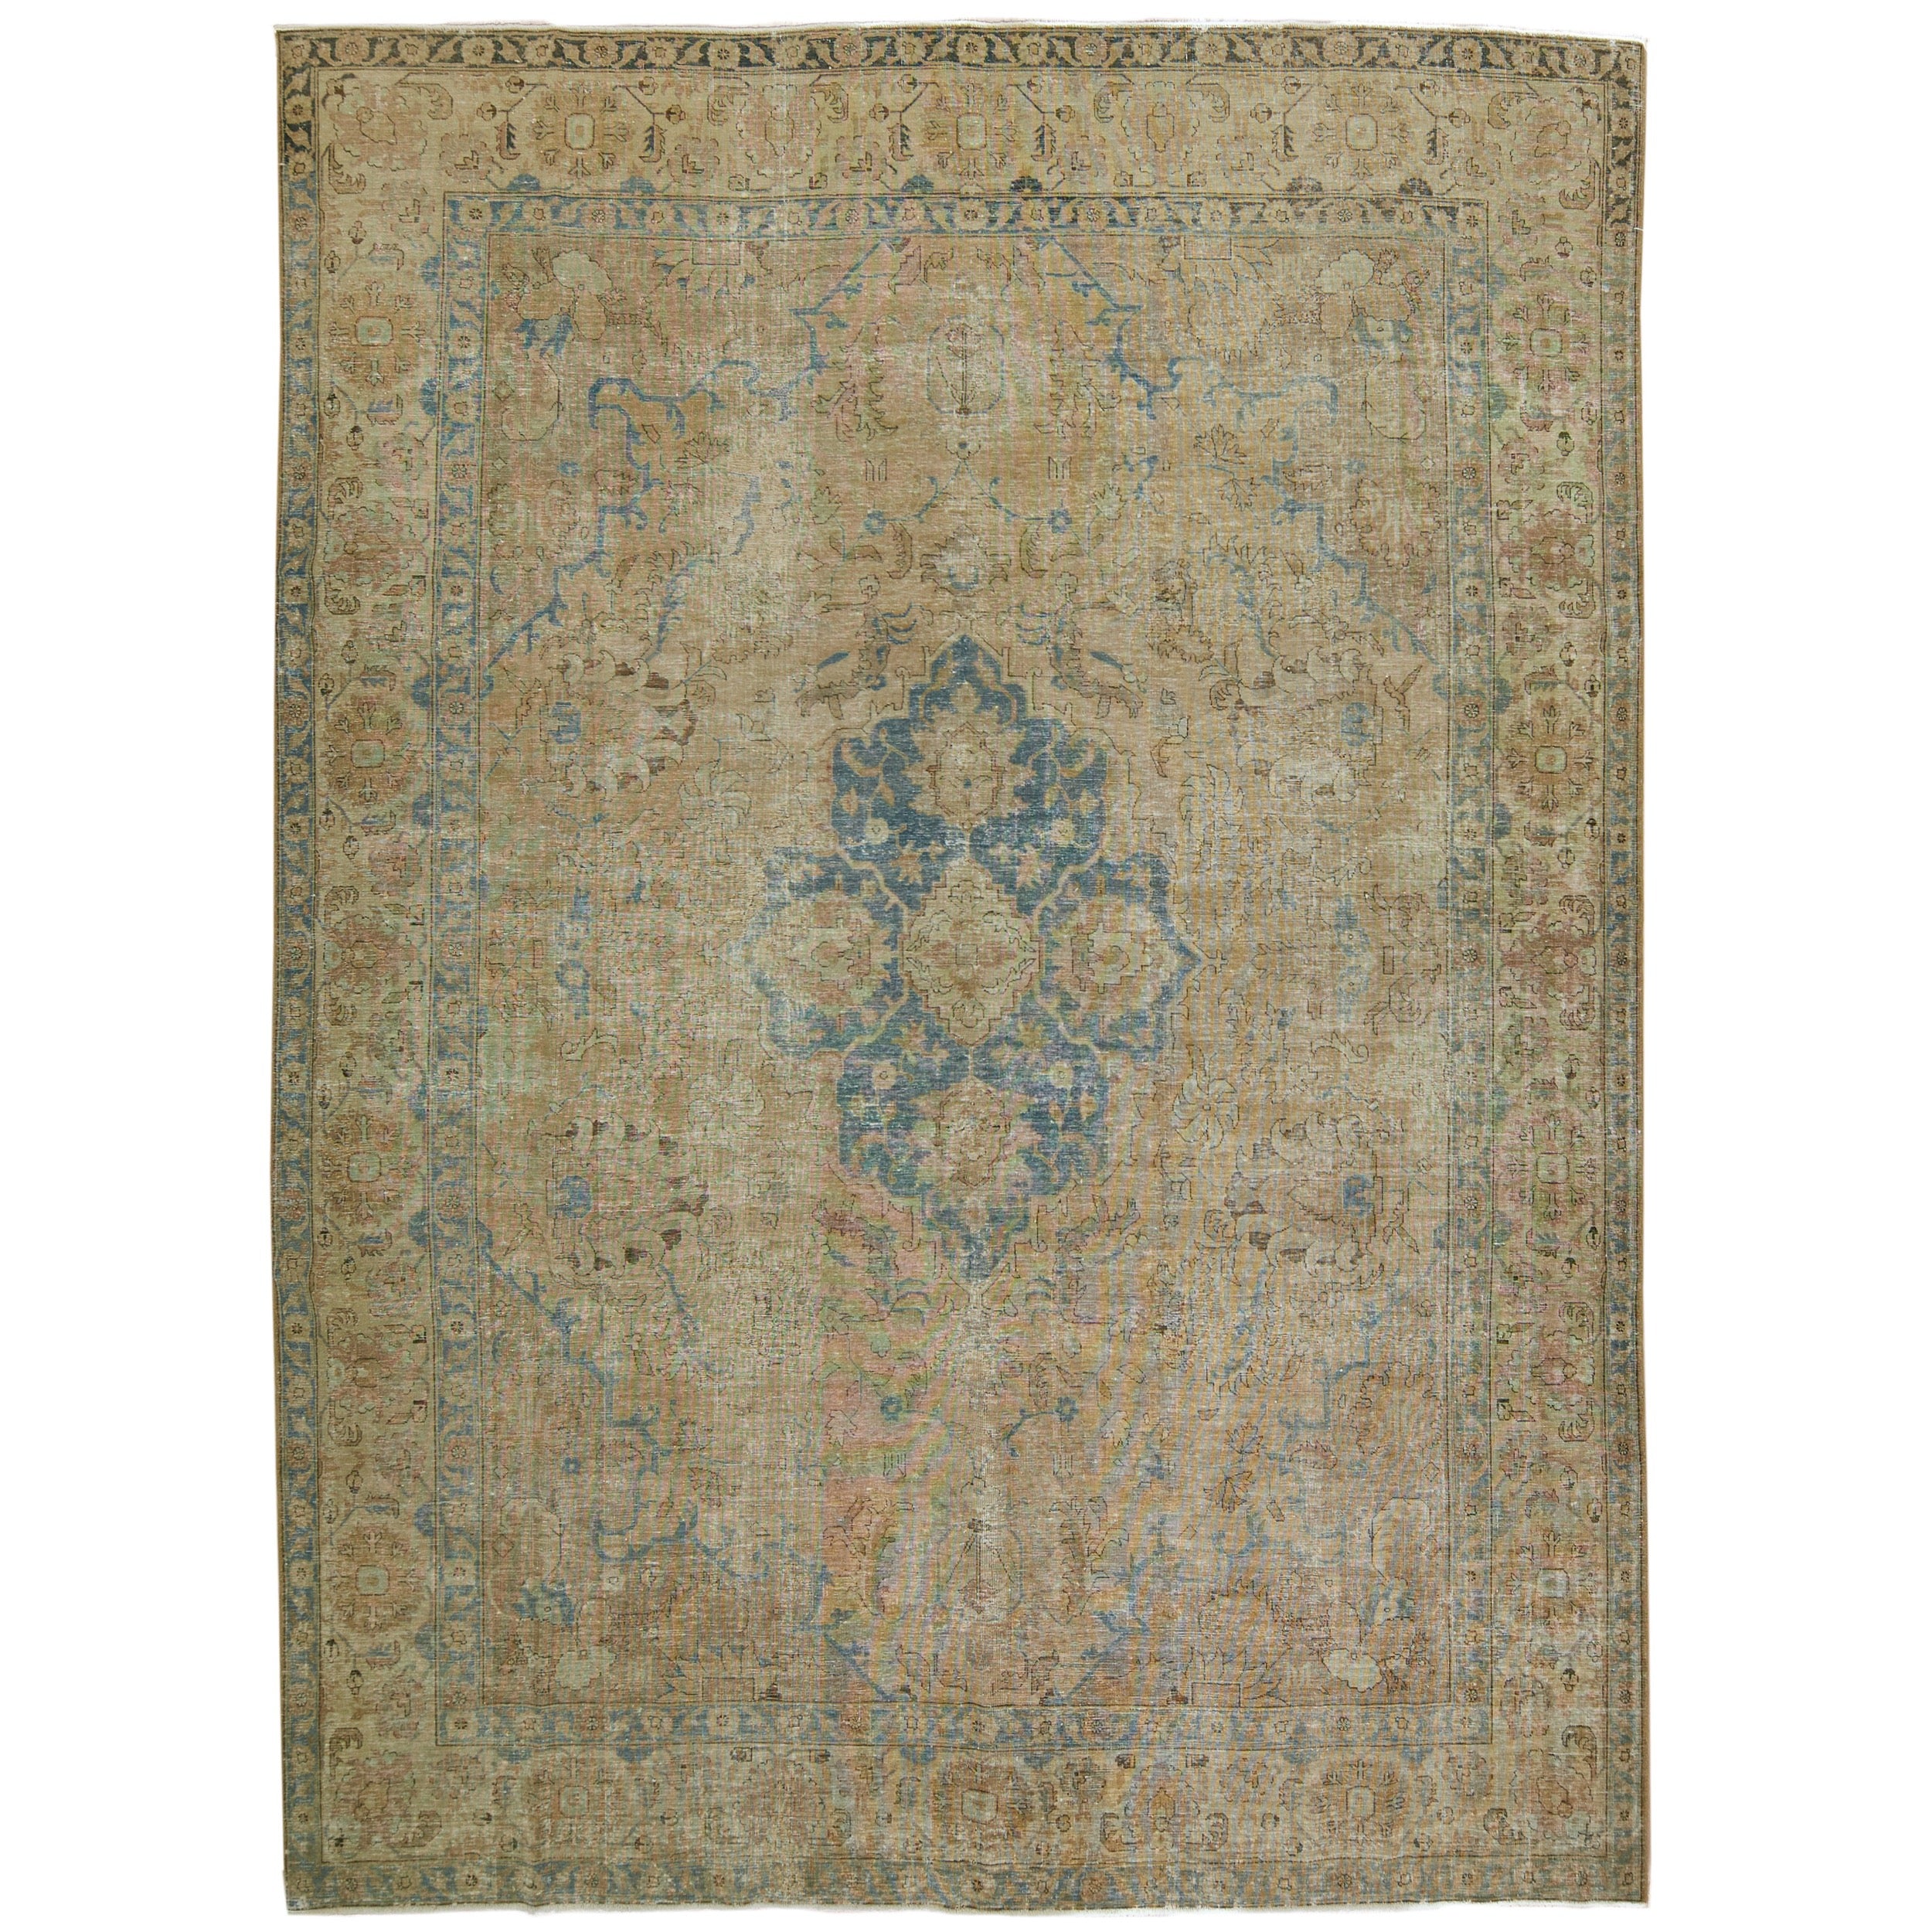 Torry - Elegance in Every Strand | Kuden Rugs